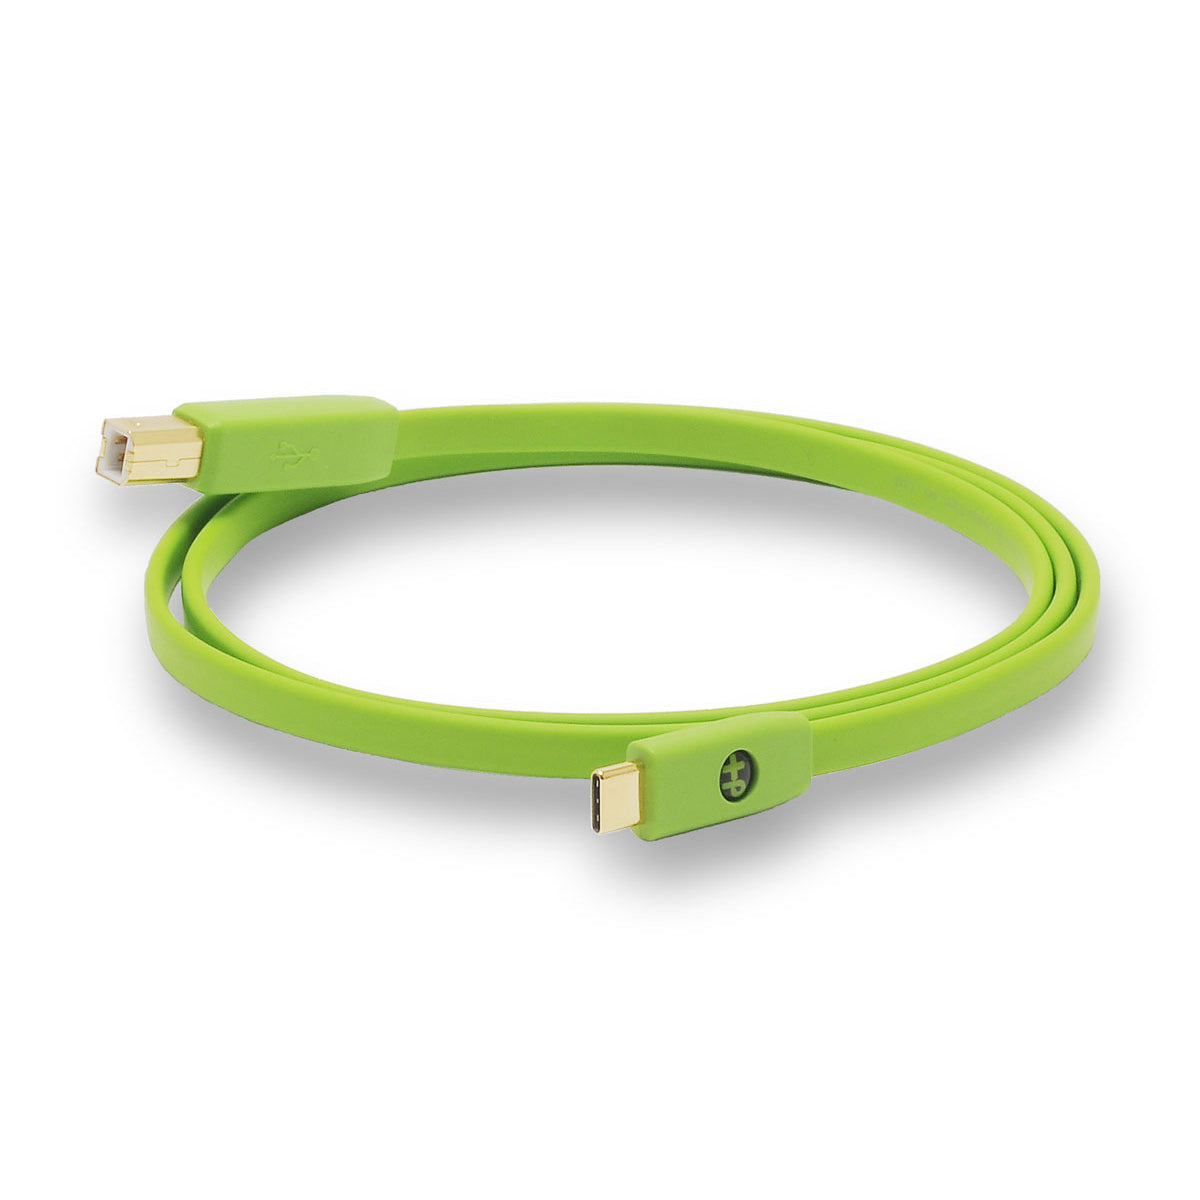 NEO D+ Class B USB C to B Cable - 2m